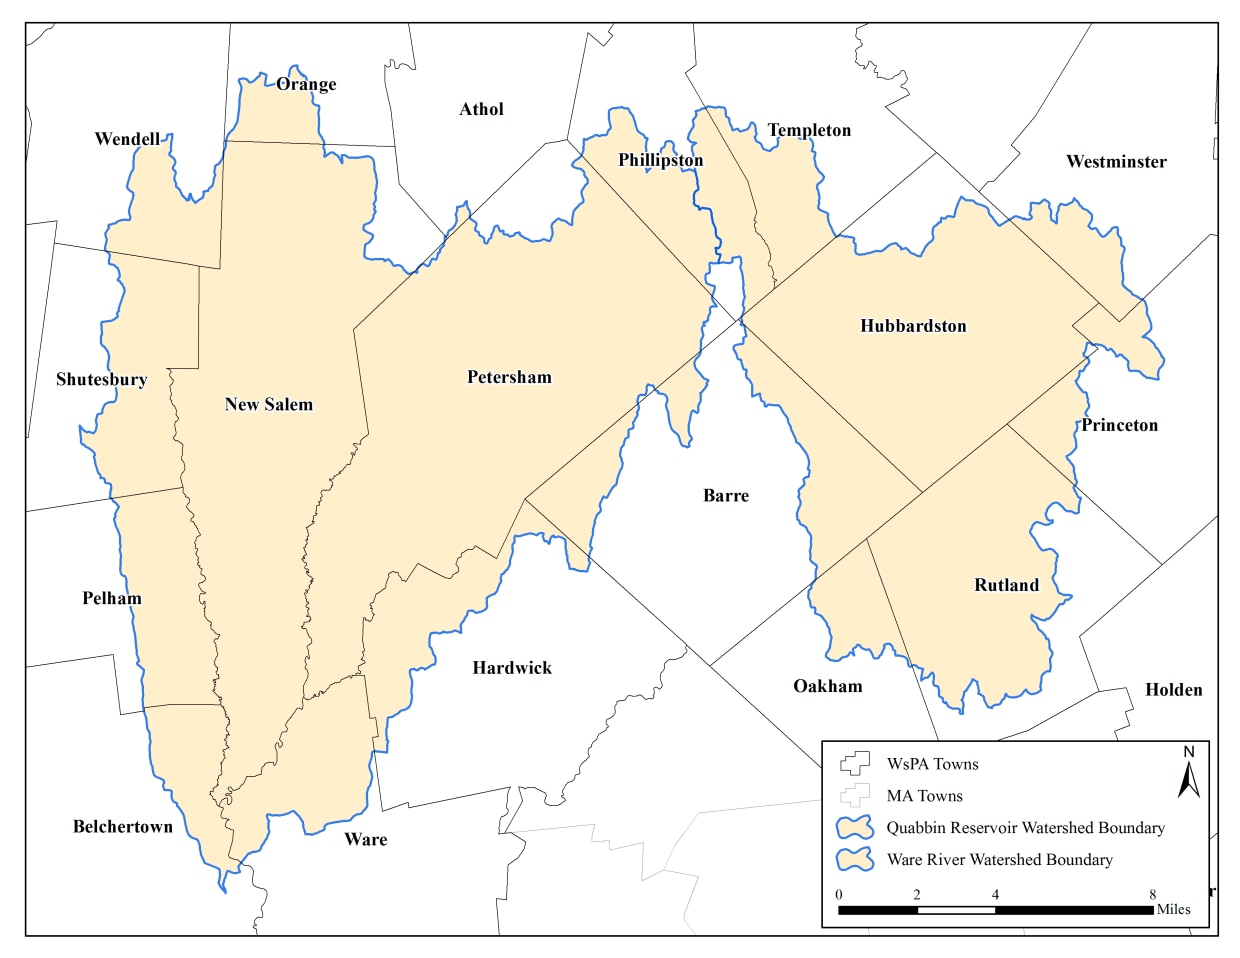 Towns in the Quabbin and Ware watersheds affected by the Watershed Protection Act